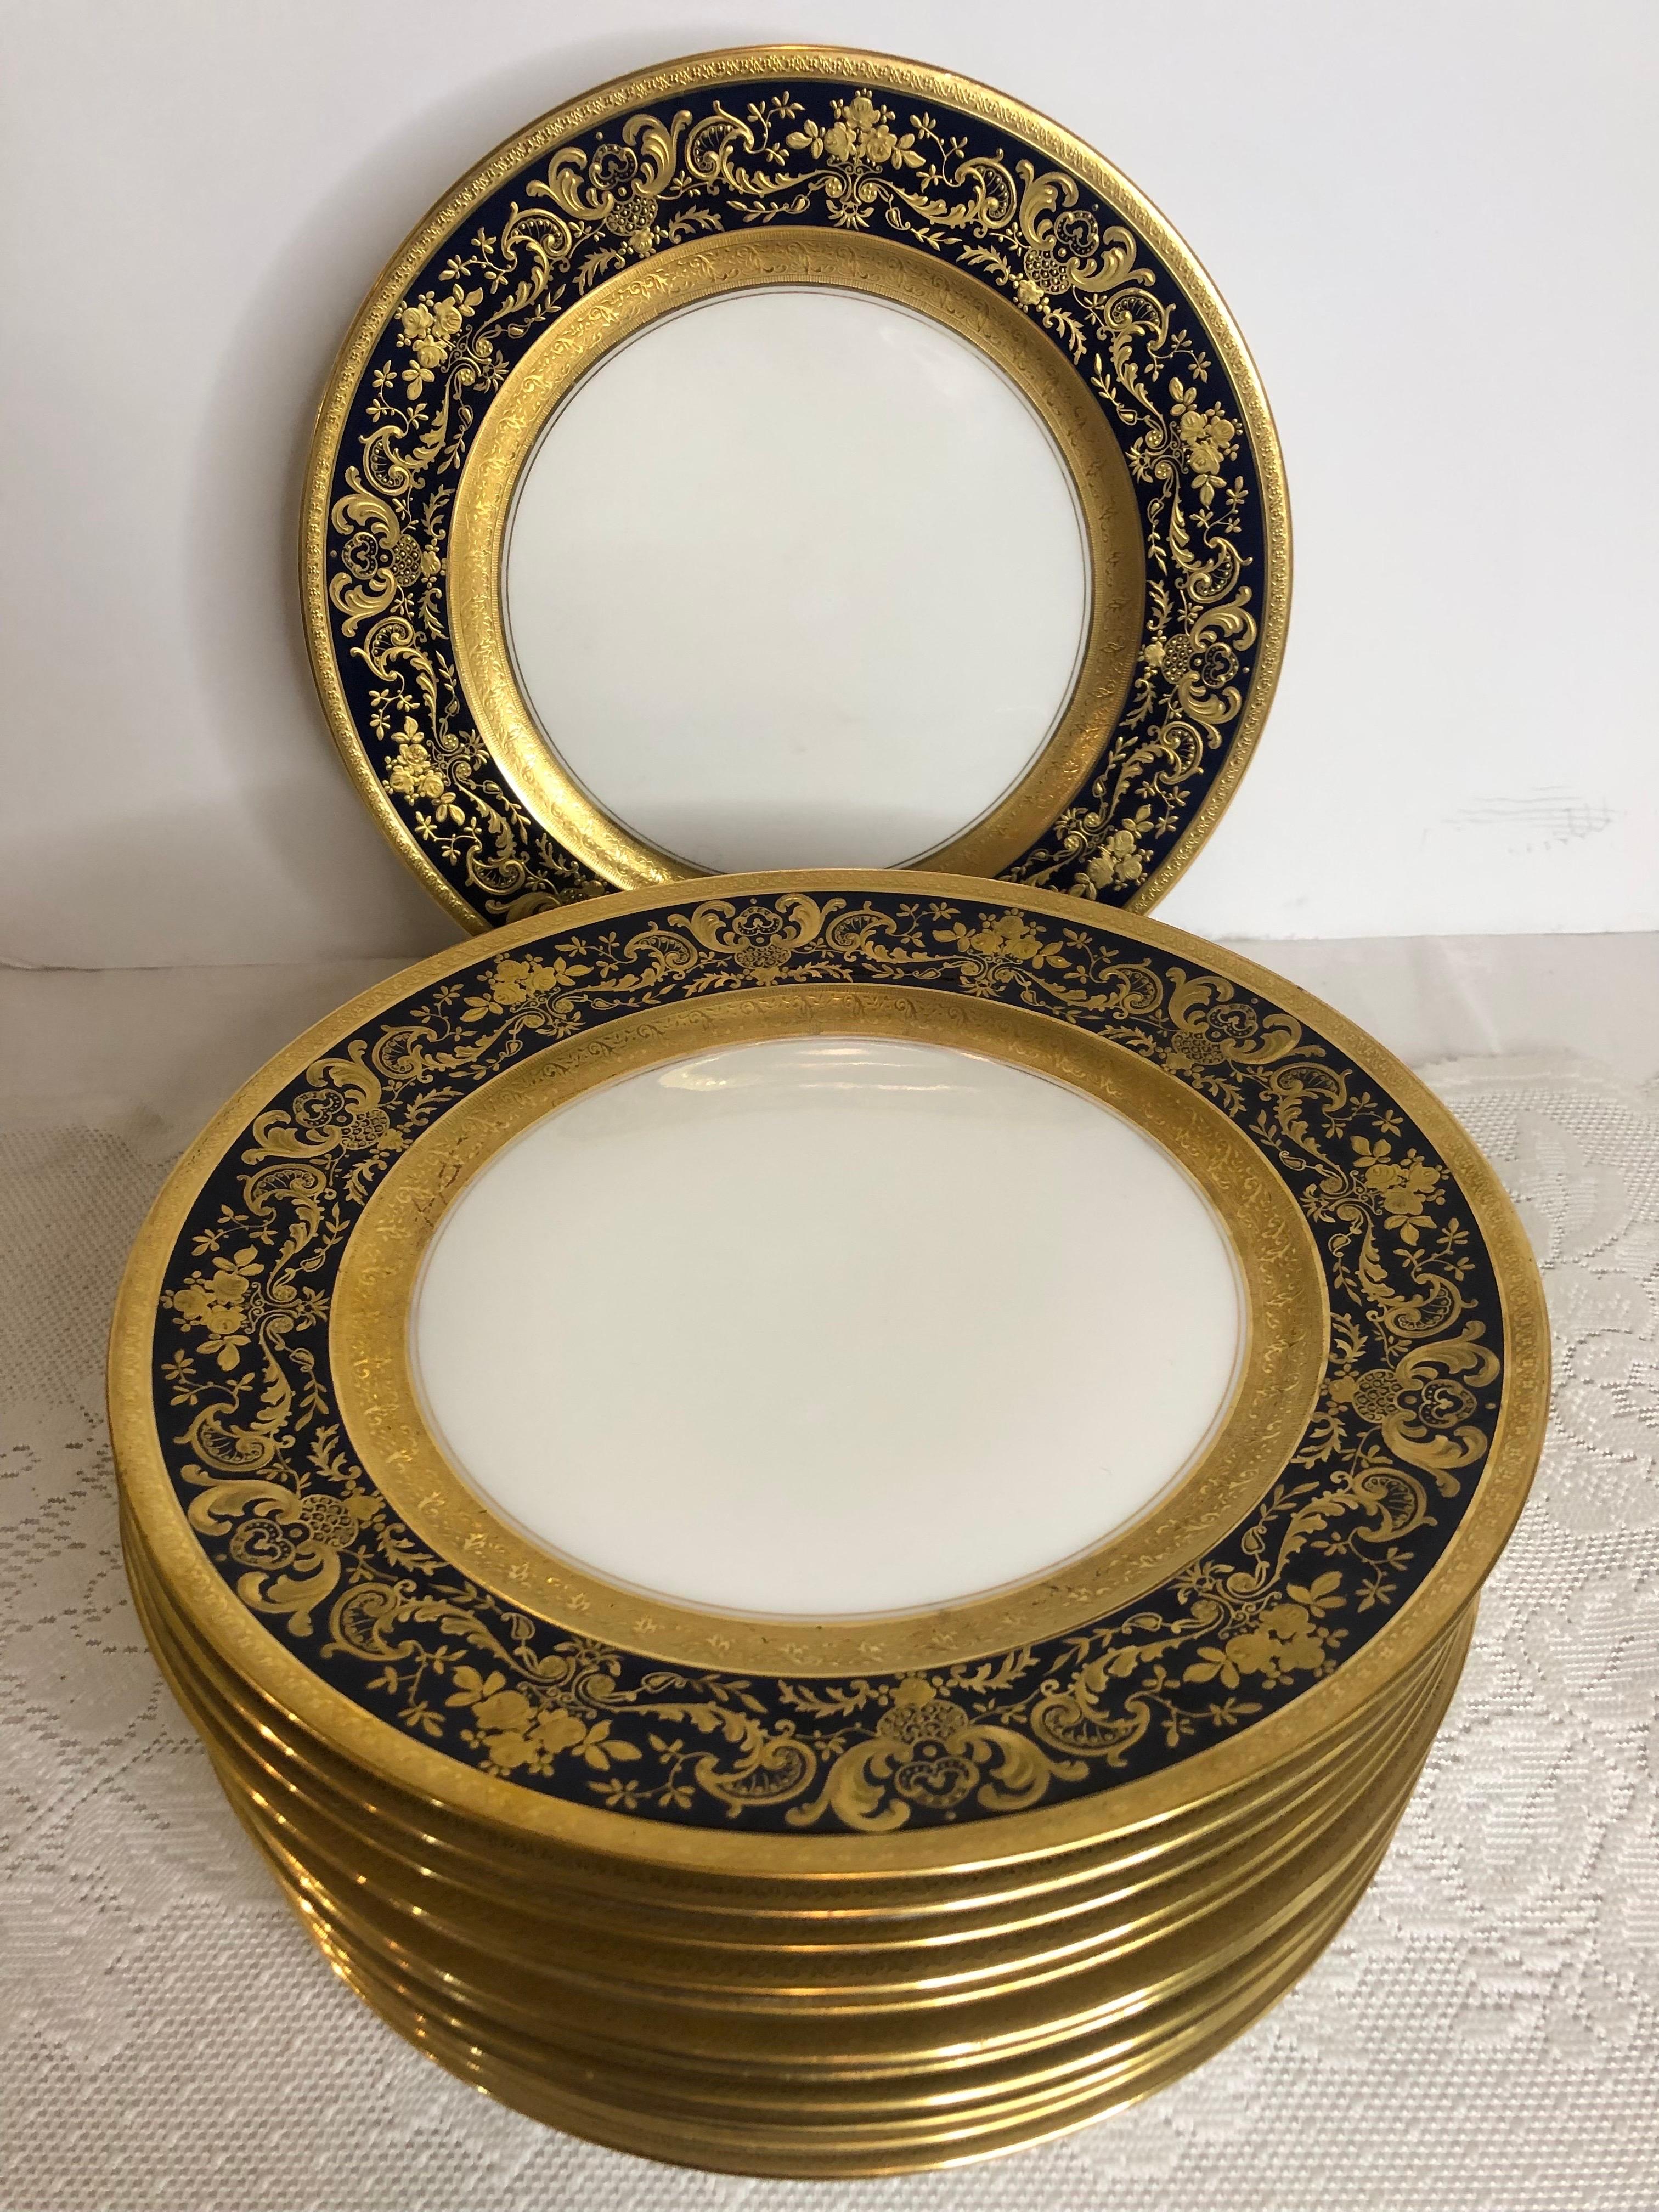 This is a fabulous set of twelve Charles Ahrenfeldt Limoges dinner plates. They have a gold embossed outer border with a thicker gold embossed inner border. In between the two gold embossed borders, is a thick cobalt center. The thick cobalt ring